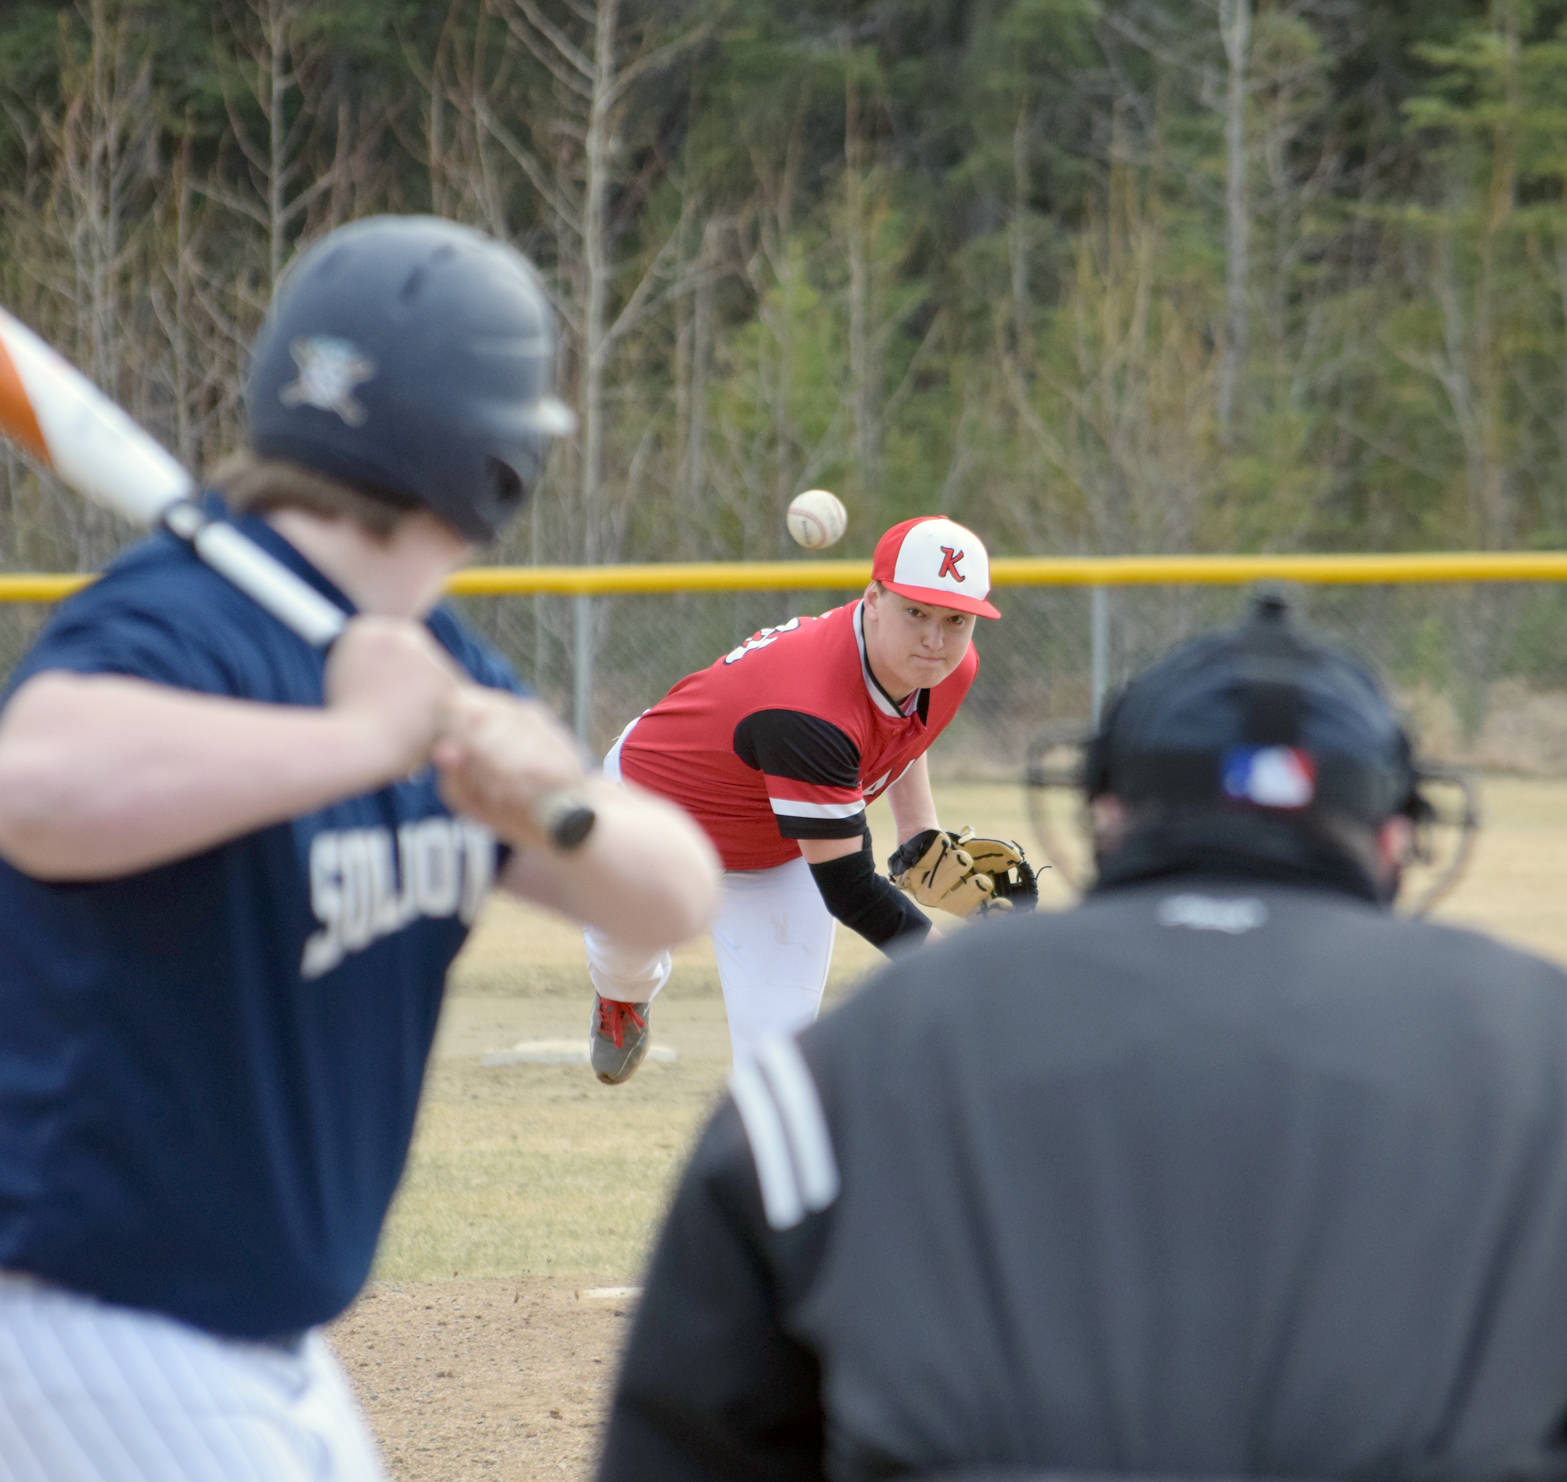 Kenai Central pitcher Knox Amend delivers to Soldotna’s Jake Marcuson on Monday, May 14, 2018, at the Soldotna Little League fields. (Photo by Jeff Helminiak/Peninsula Clarion)